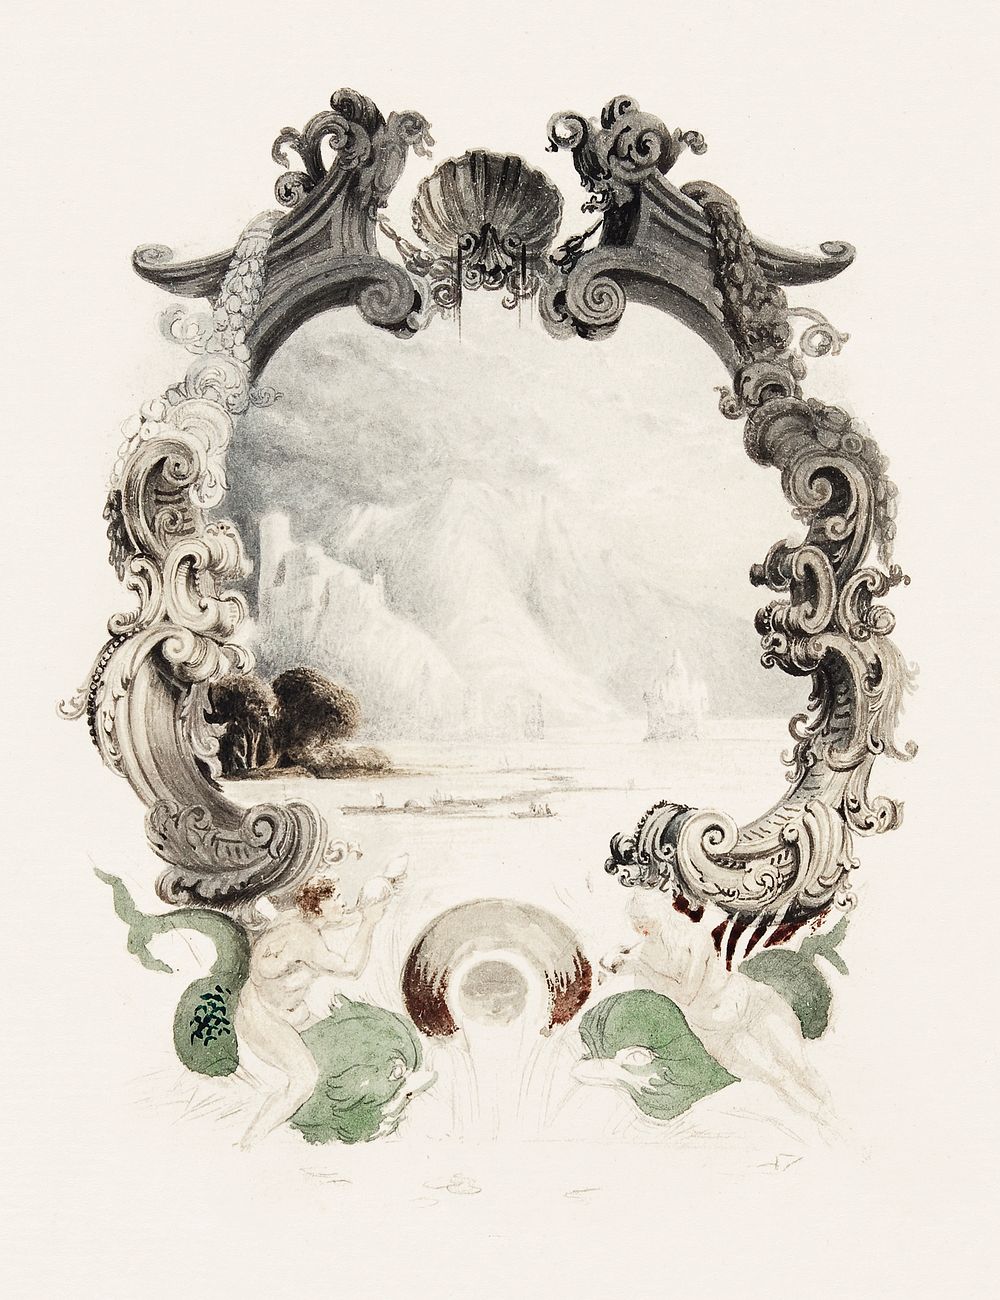 Ornamental marine cartouche during the 19th century. Original from The MET Museum. Digitally enhanced by rawpixel.